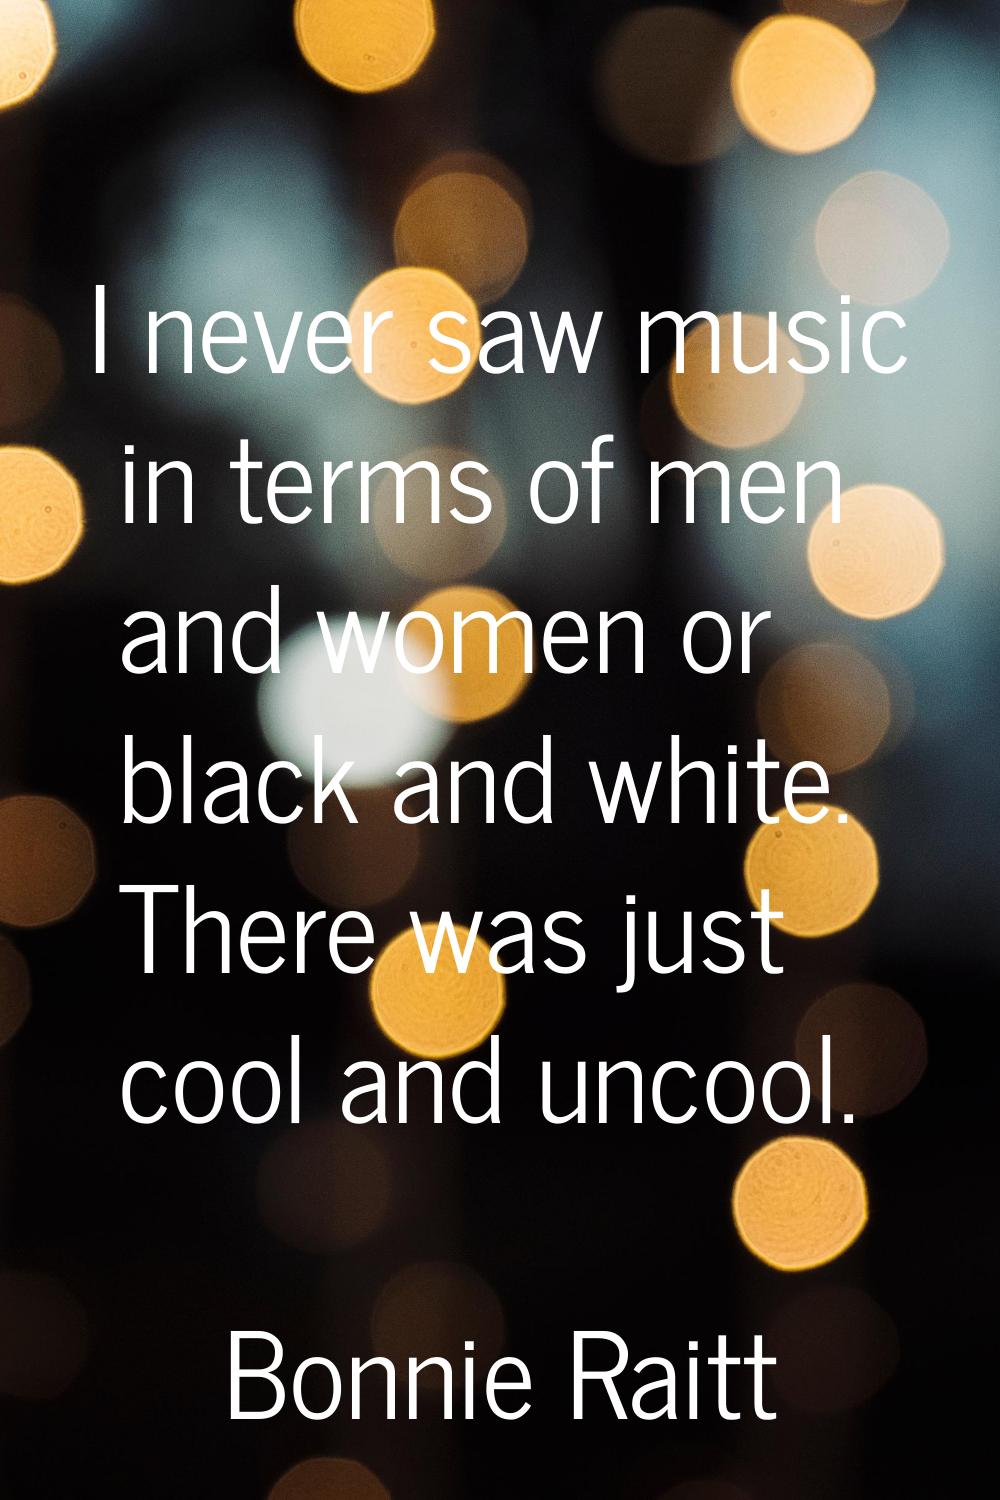 I never saw music in terms of men and women or black and white. There was just cool and uncool.